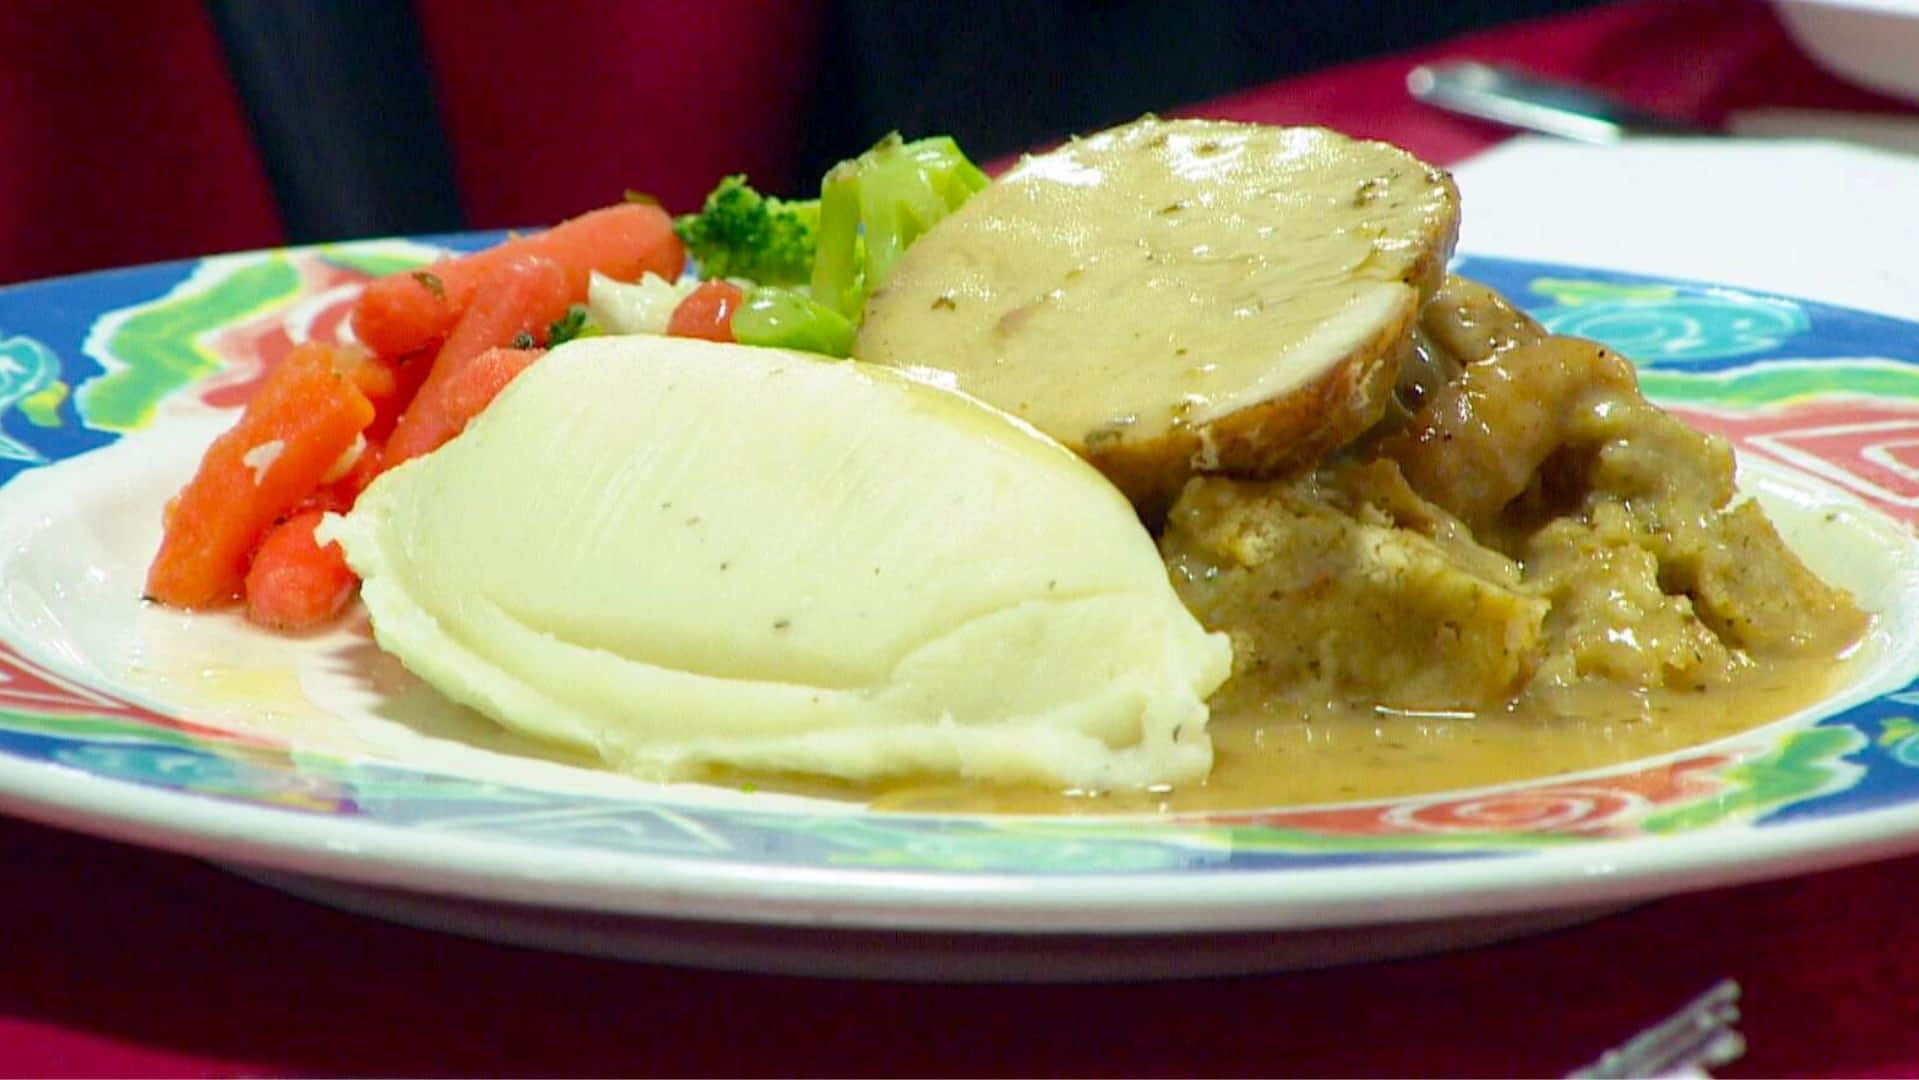 even with rising food costs many canadians find thanksgiving meal traditions tough to break 4